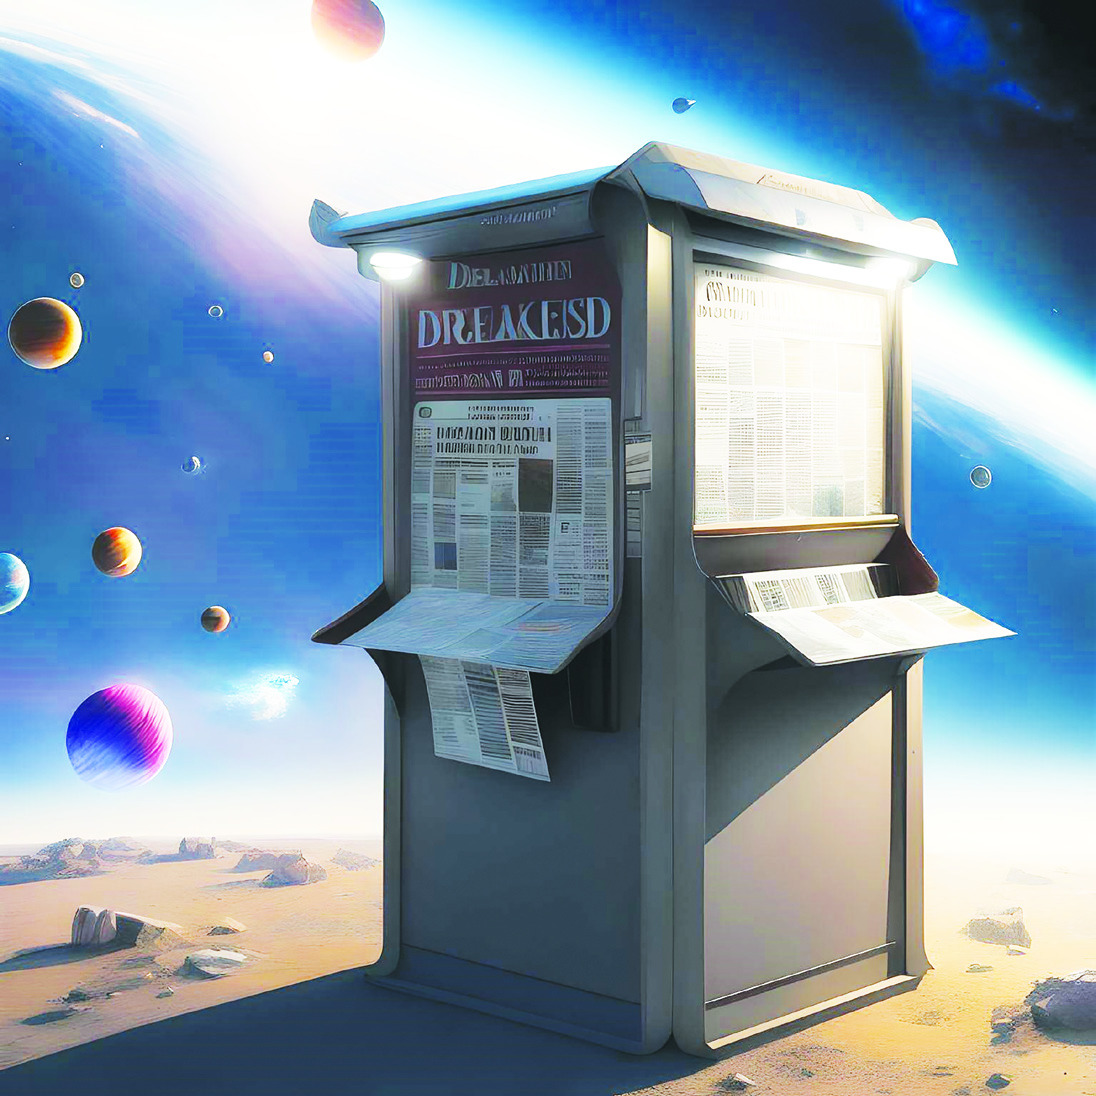 An Artificial Intelligence image generator designed this picture when it was asked to make a “newspaper stand in space.” Provided